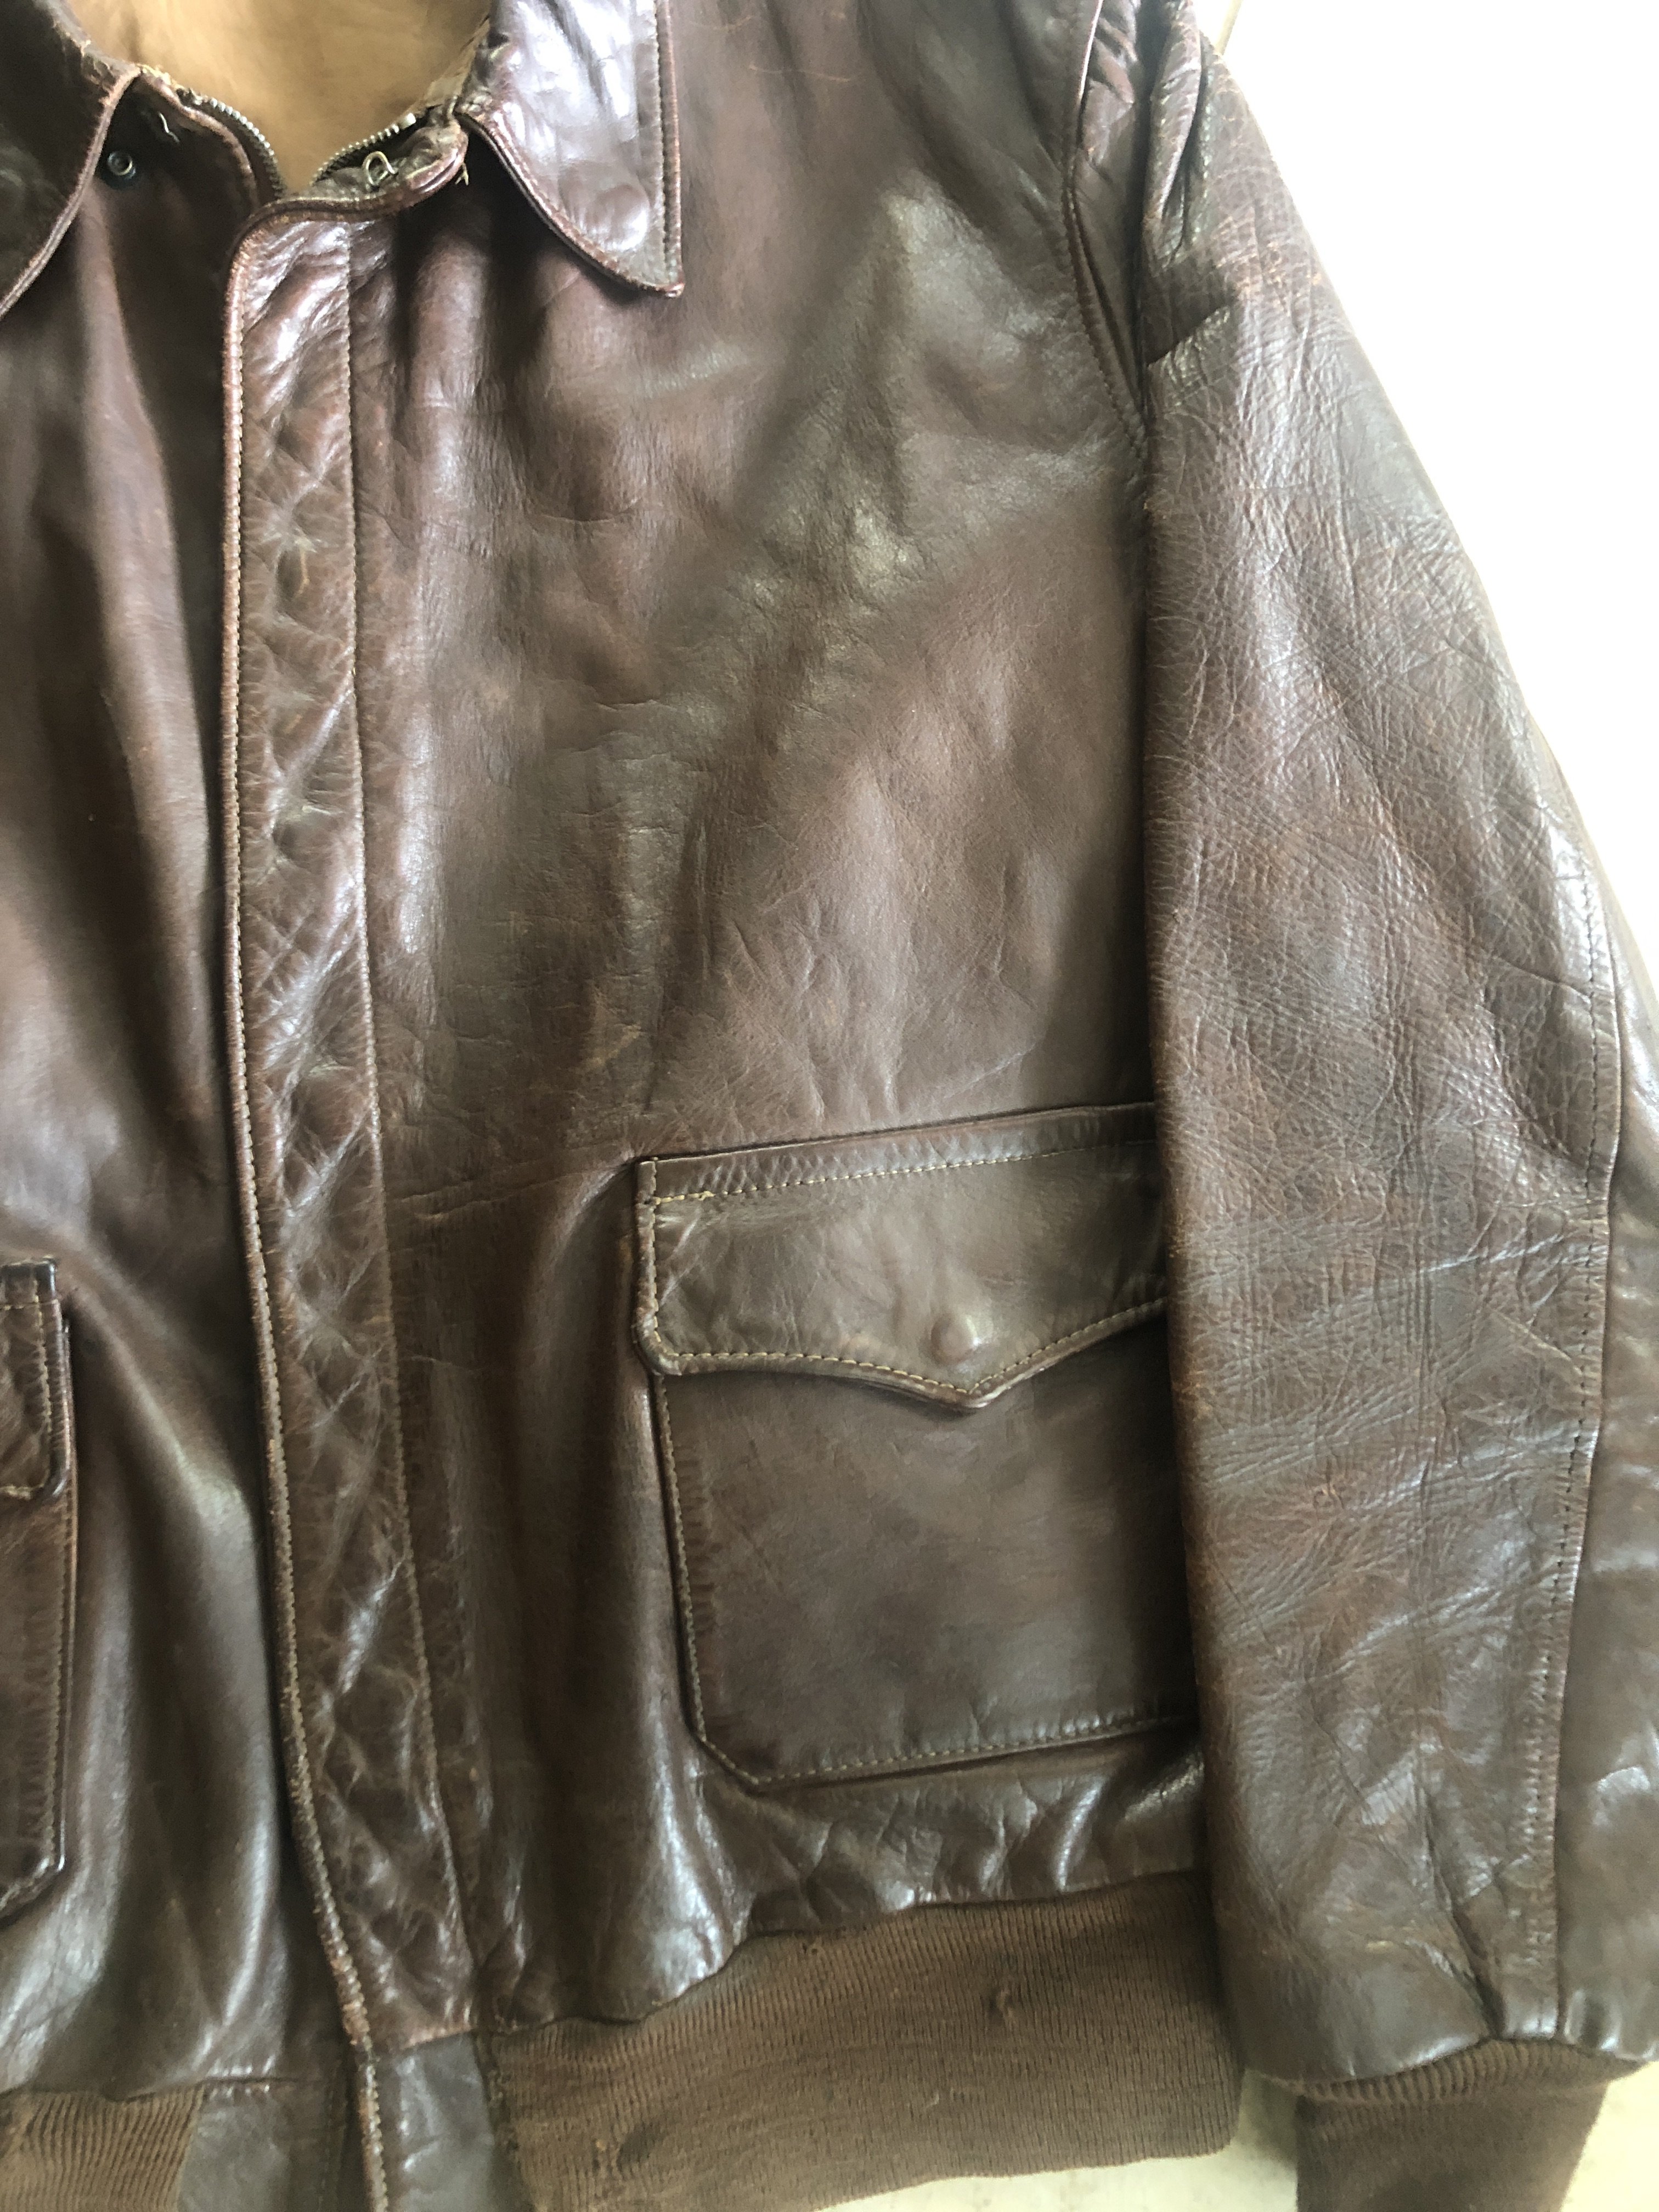 Original 1942 Bronco 29181 in a rare size 46. | Vintage Leather Jackets ...